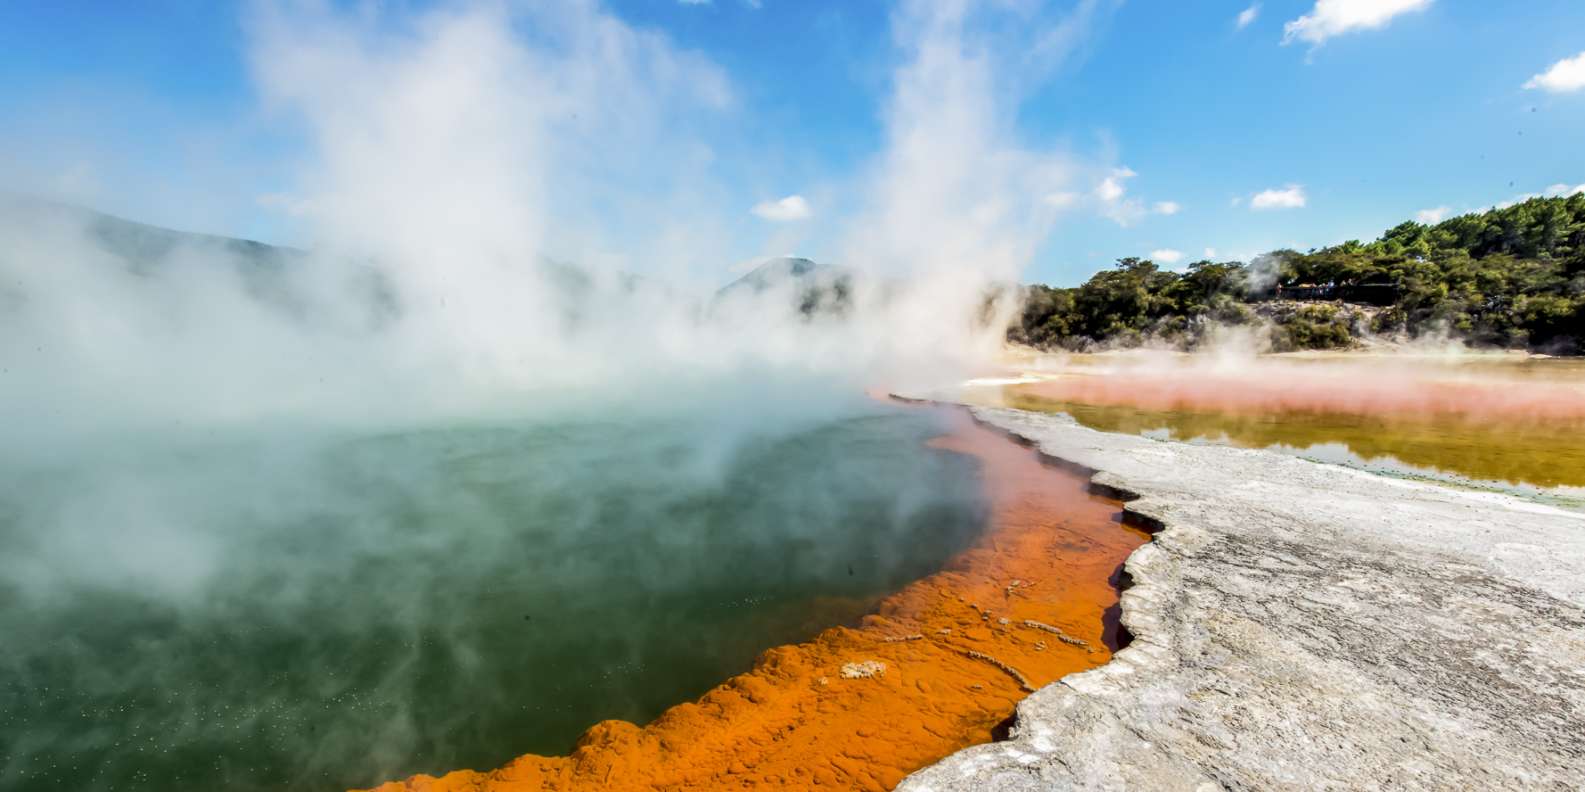 The BEST Rotorua Nature & adventure 2023 FREE Cancellation GetYourGuide